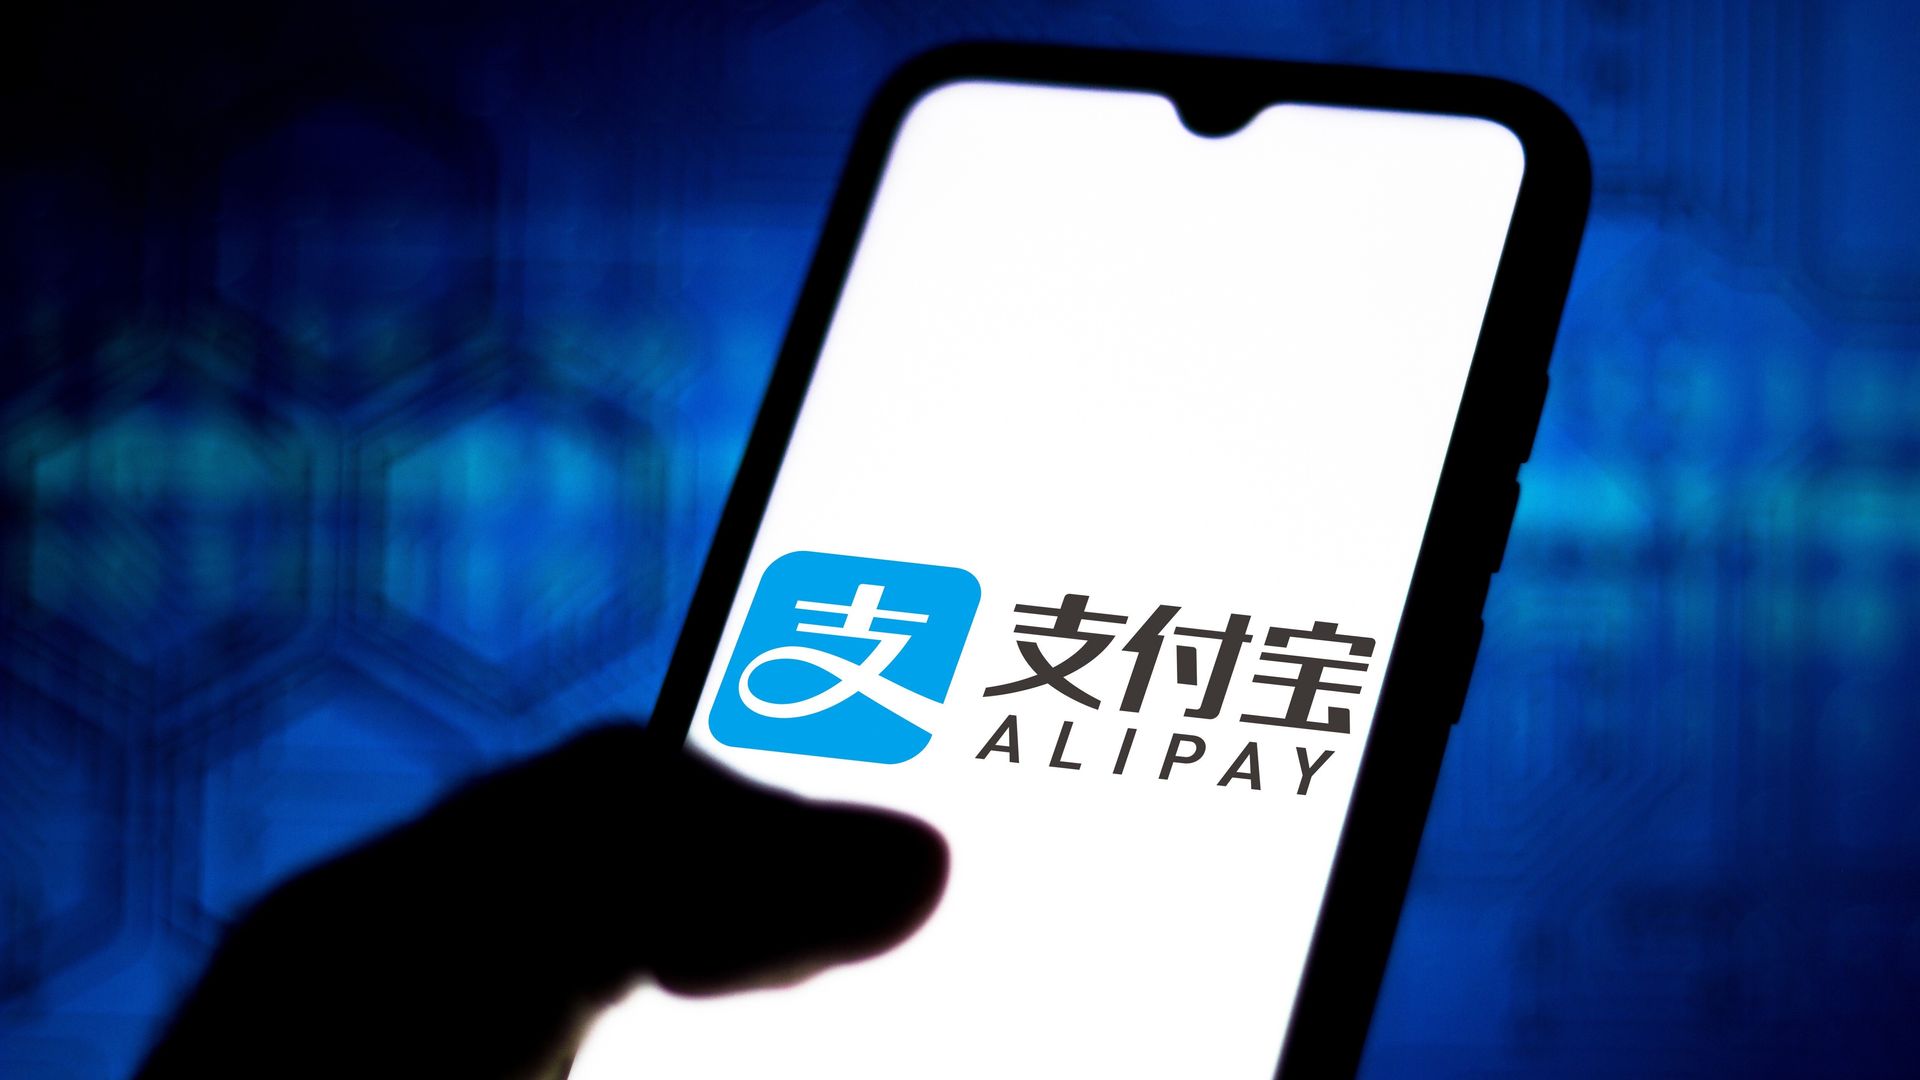 JP is now using Alipay to process credit card payments TechRadar